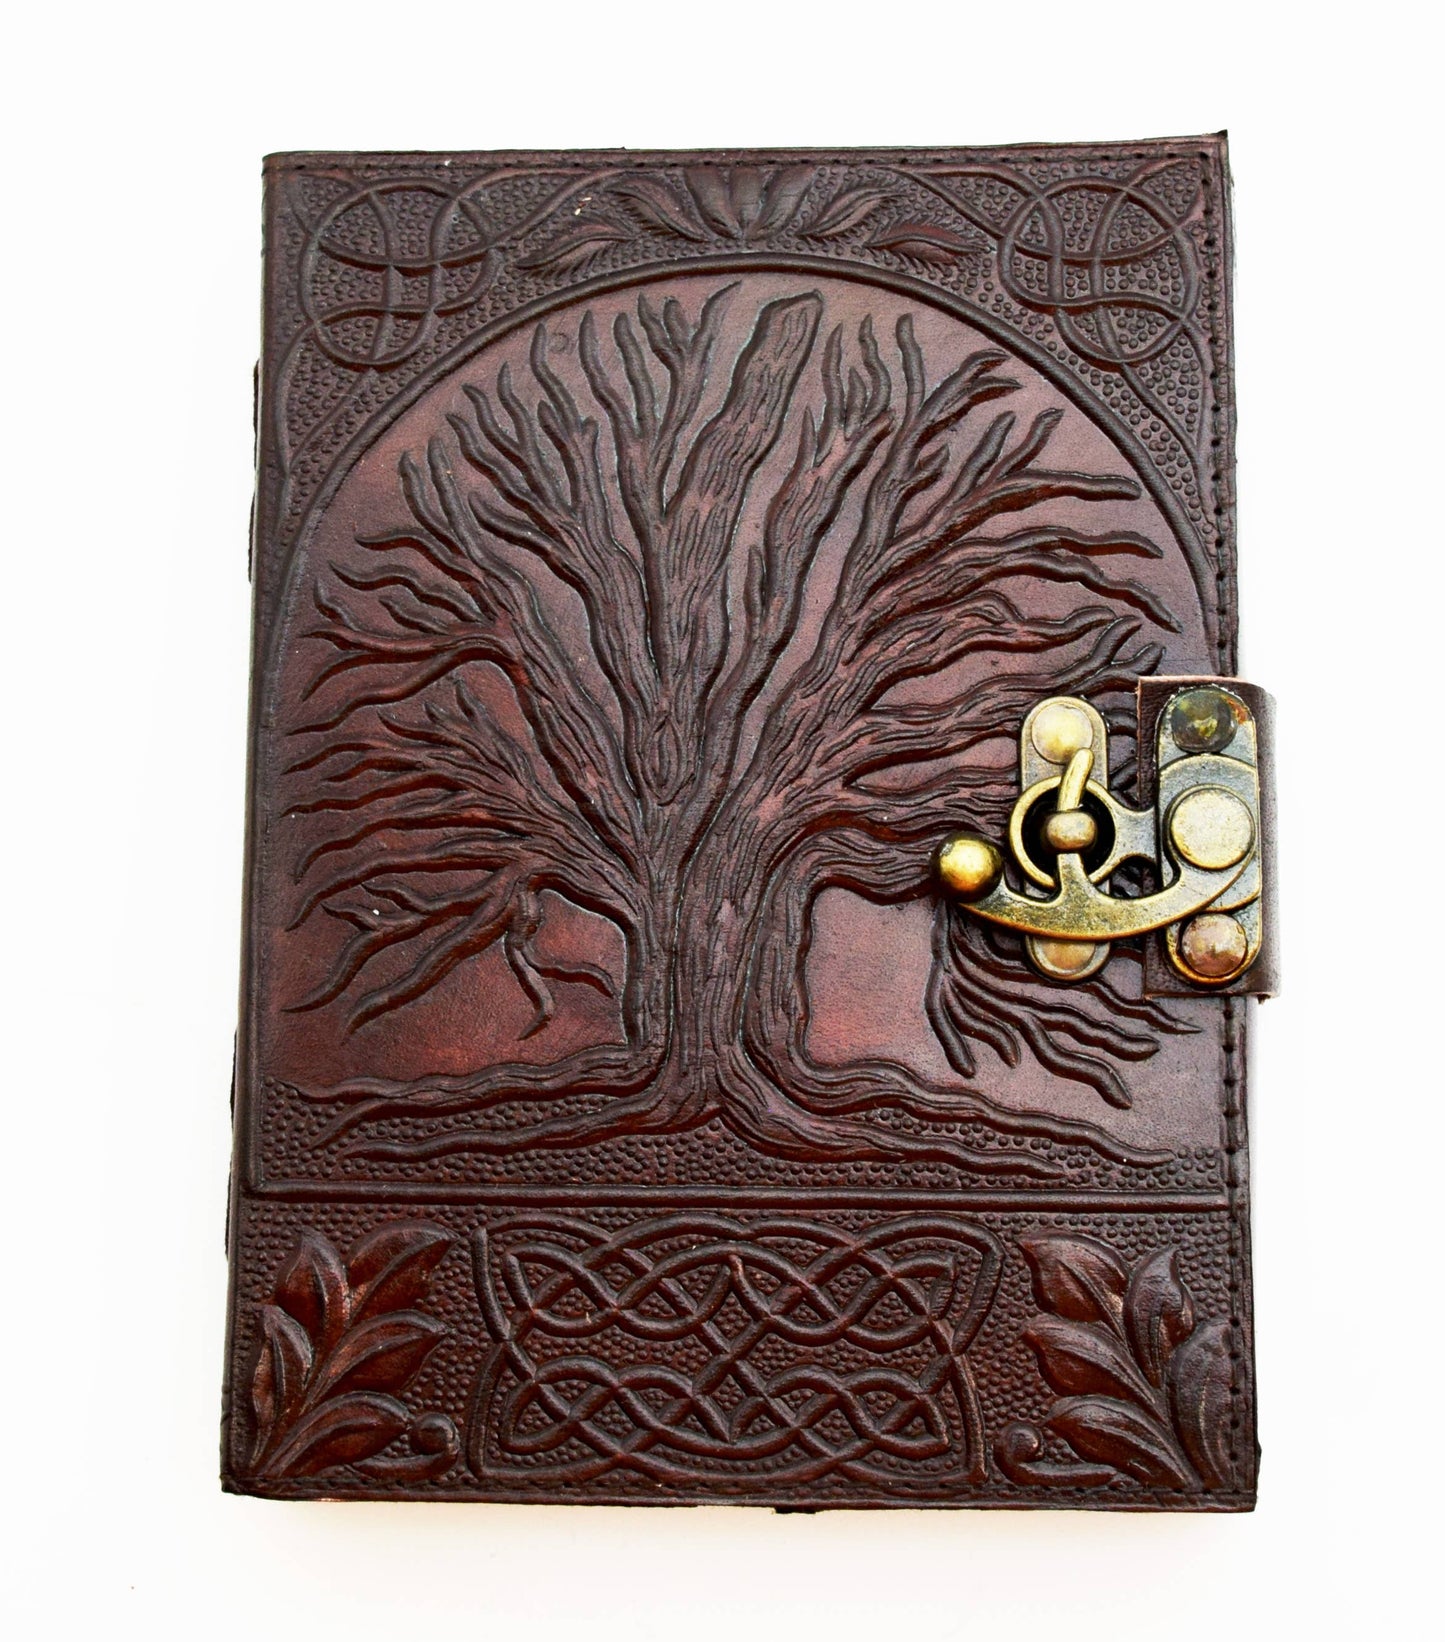 5 x 7 inch Tree of Life Leather Embossed Journal with Aged L